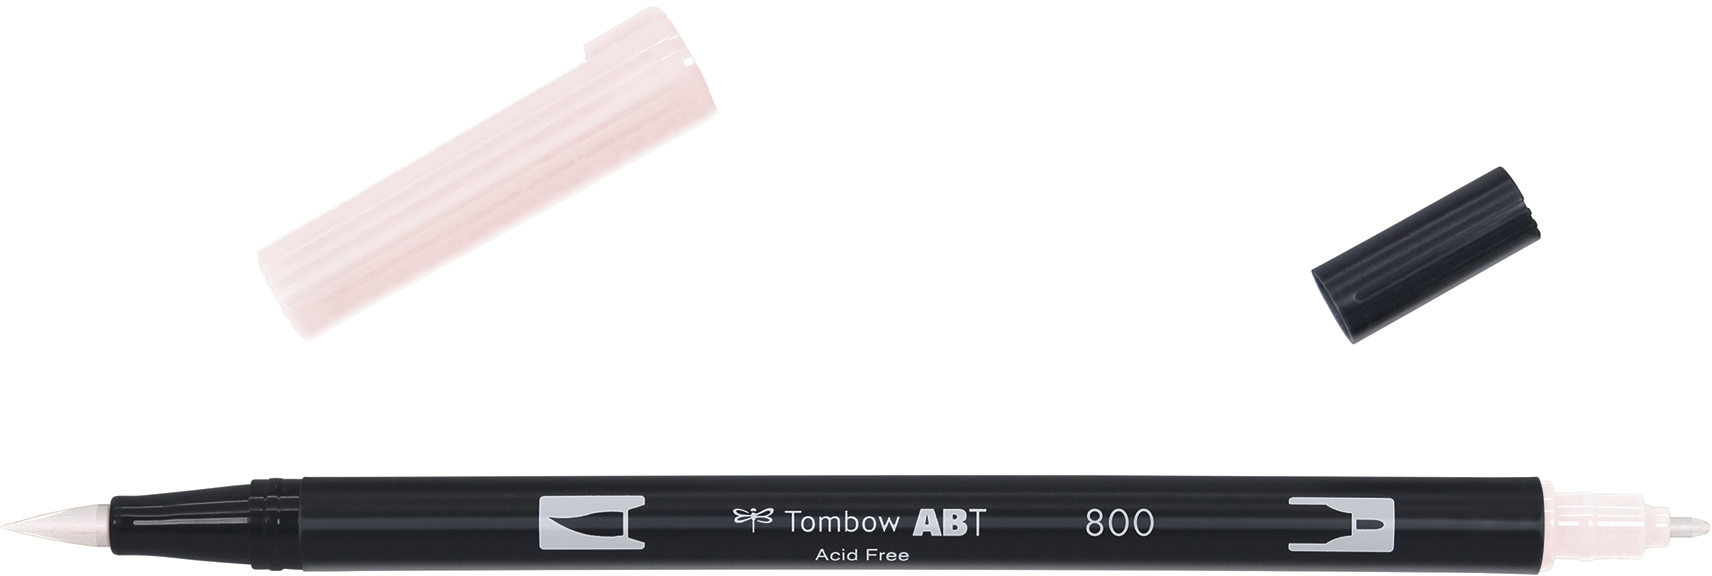 TOMBOW Dual Brush Pen ABT 800 baby pink baby pink